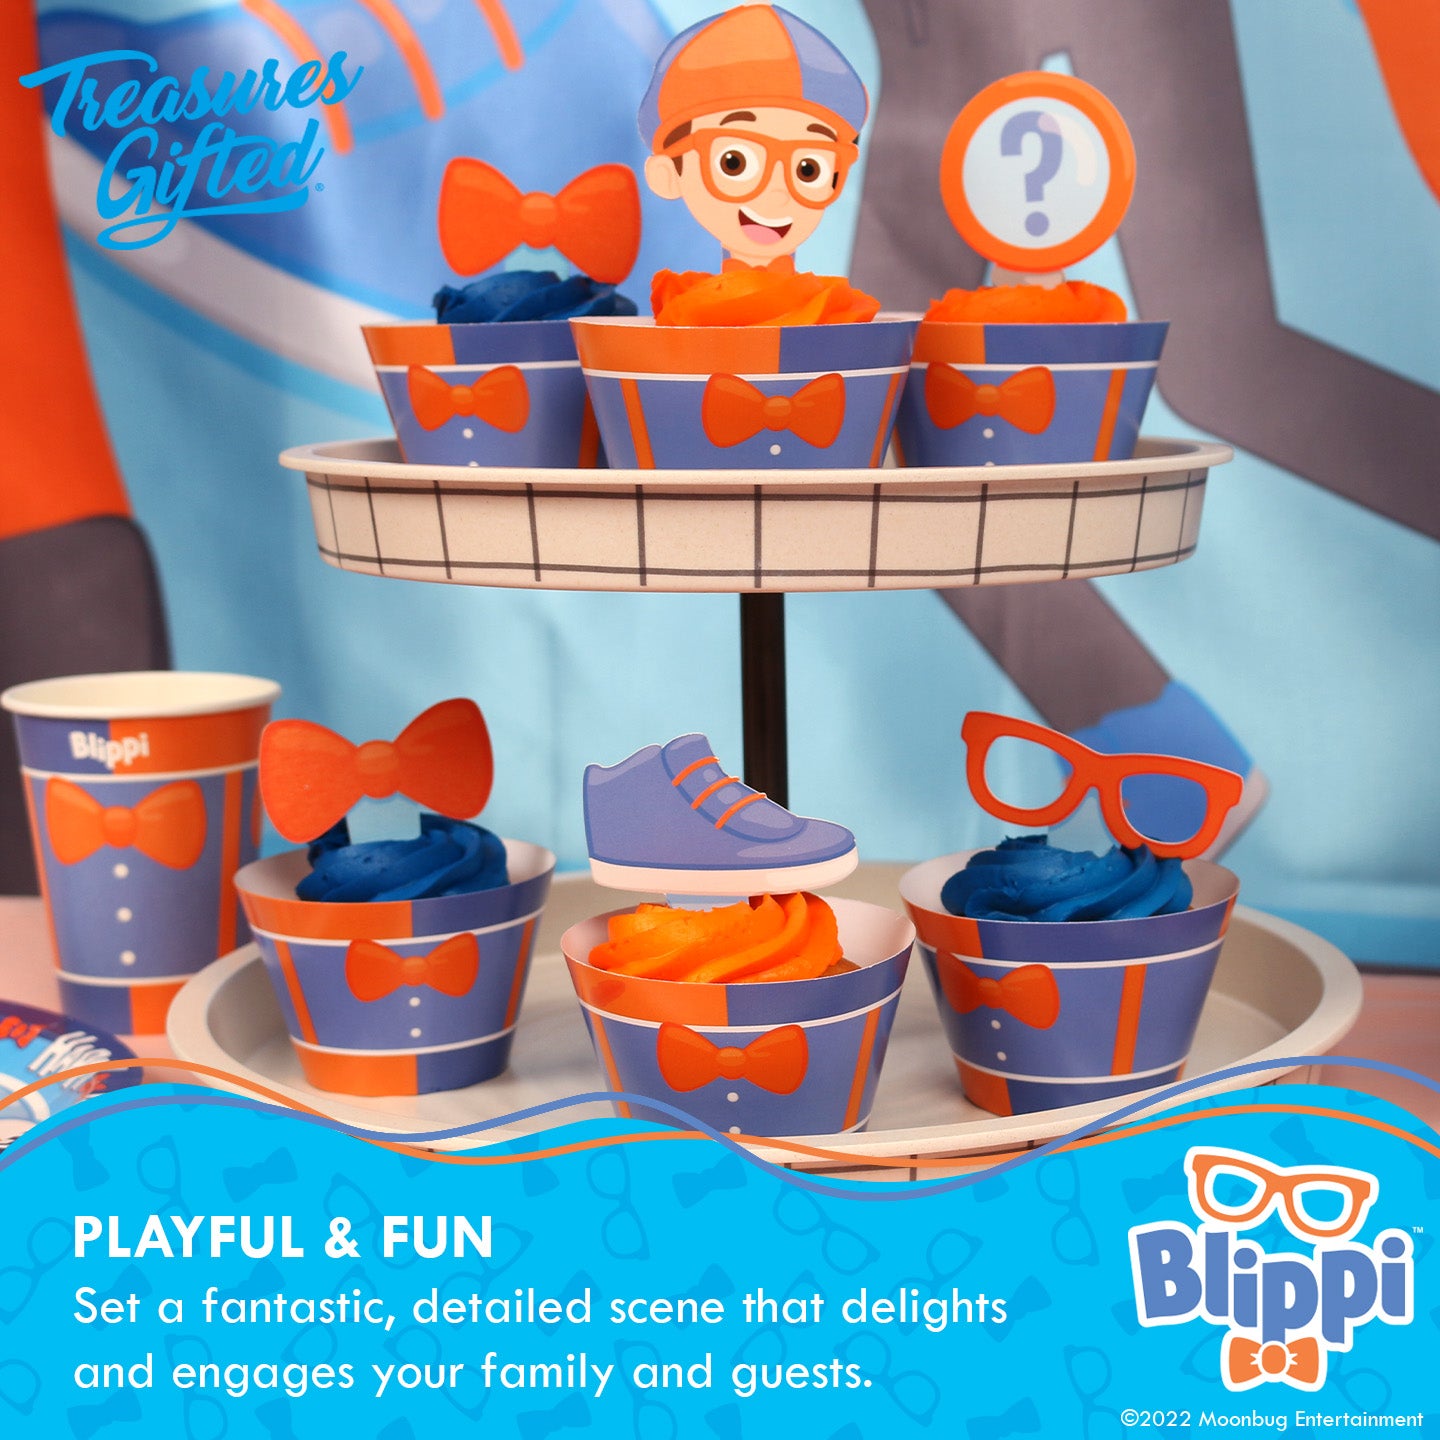 Treasures Gifted Officially Licensed Blippi Party Paper Cups 8ct - 9oz  Blippi Cups for Kids - Blippi…See more Treasures Gifted Officially Licensed